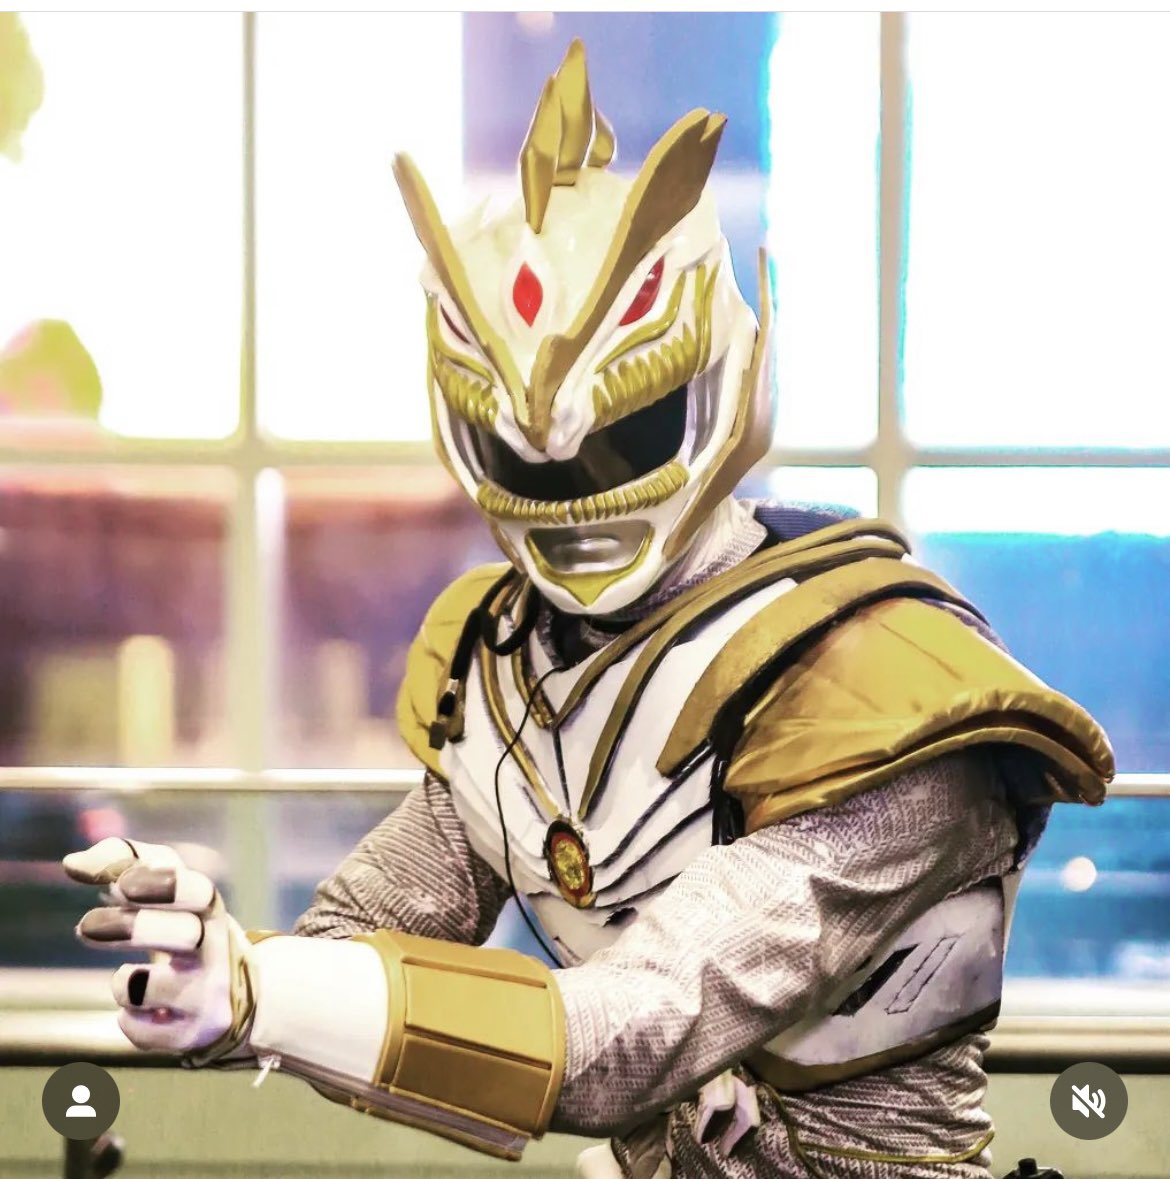 They should have let bro @justjedi on IG help with LOTWD this cosplay is fire bro🙏🏽⚪️🐉 @jdfffn @BatintheSun #LOTWD #ComingSoon #PowerRangers